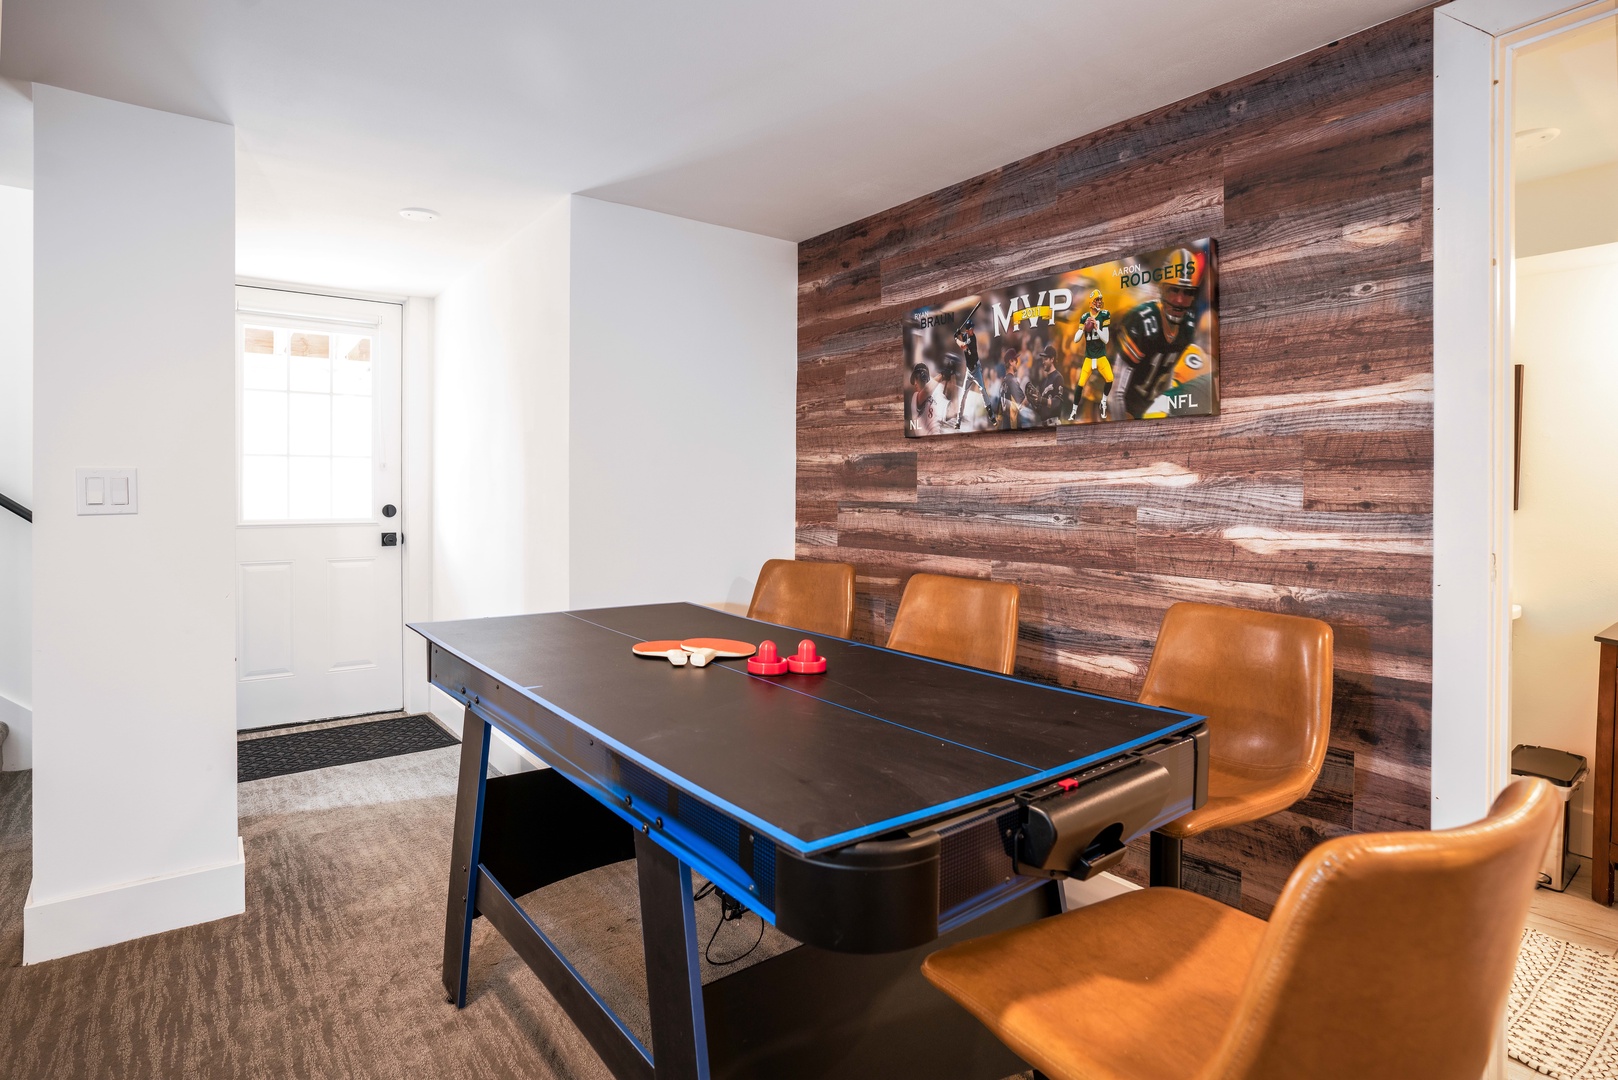 Basement game room with living space, Smart TV, ping pong, foosball, game table, and children area